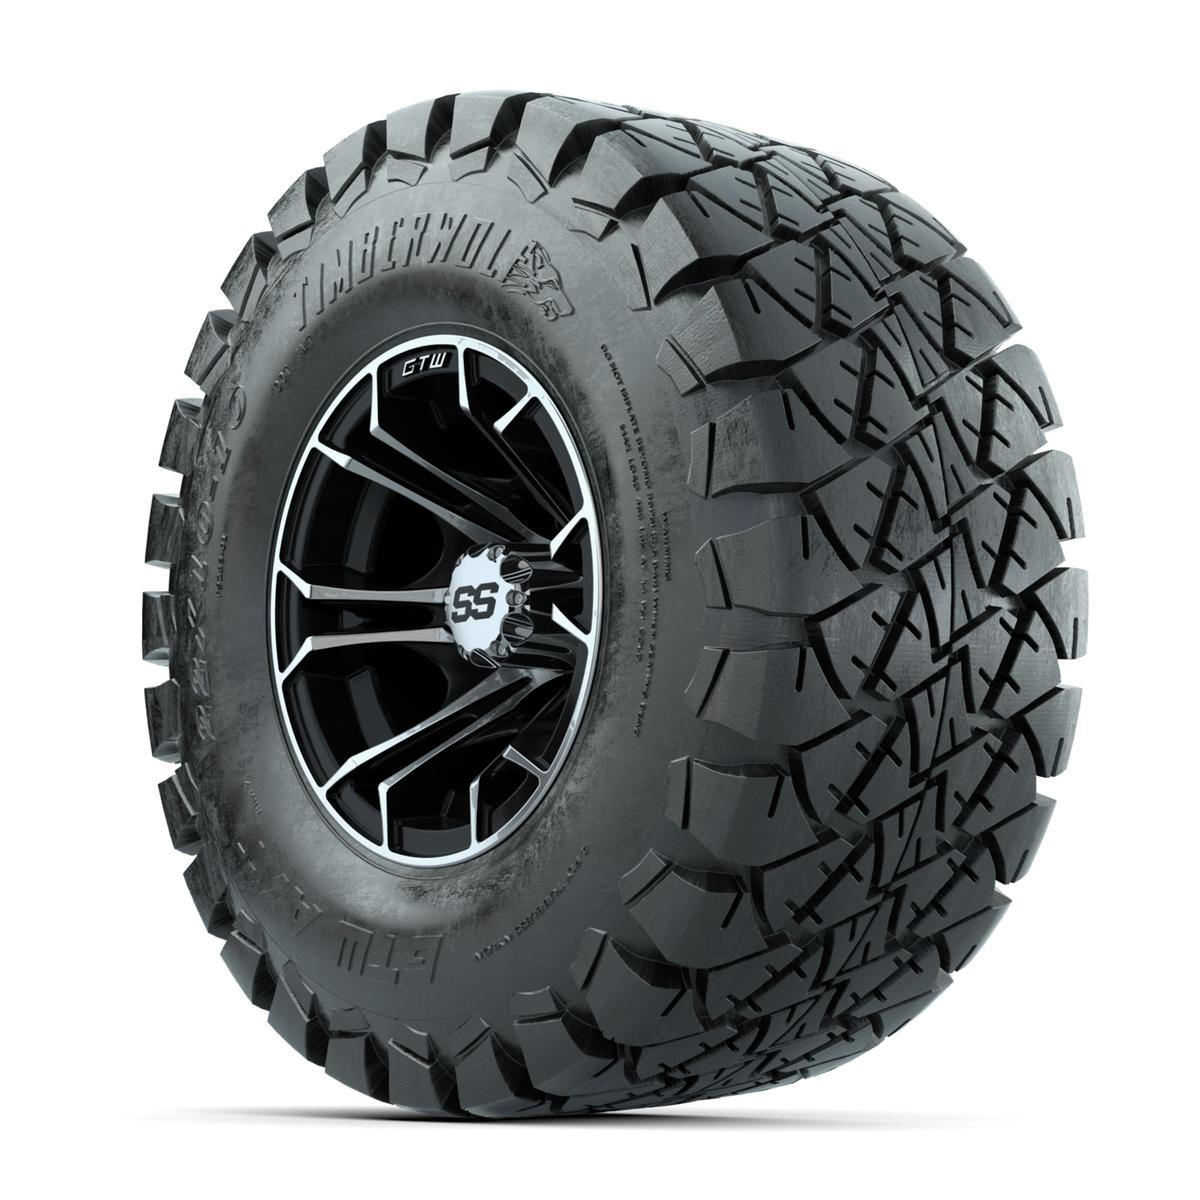 GTW Spyder Machined/Black 10 in Wheels with 22x10-10 Timberwolf All Terrain Tires – Full Set